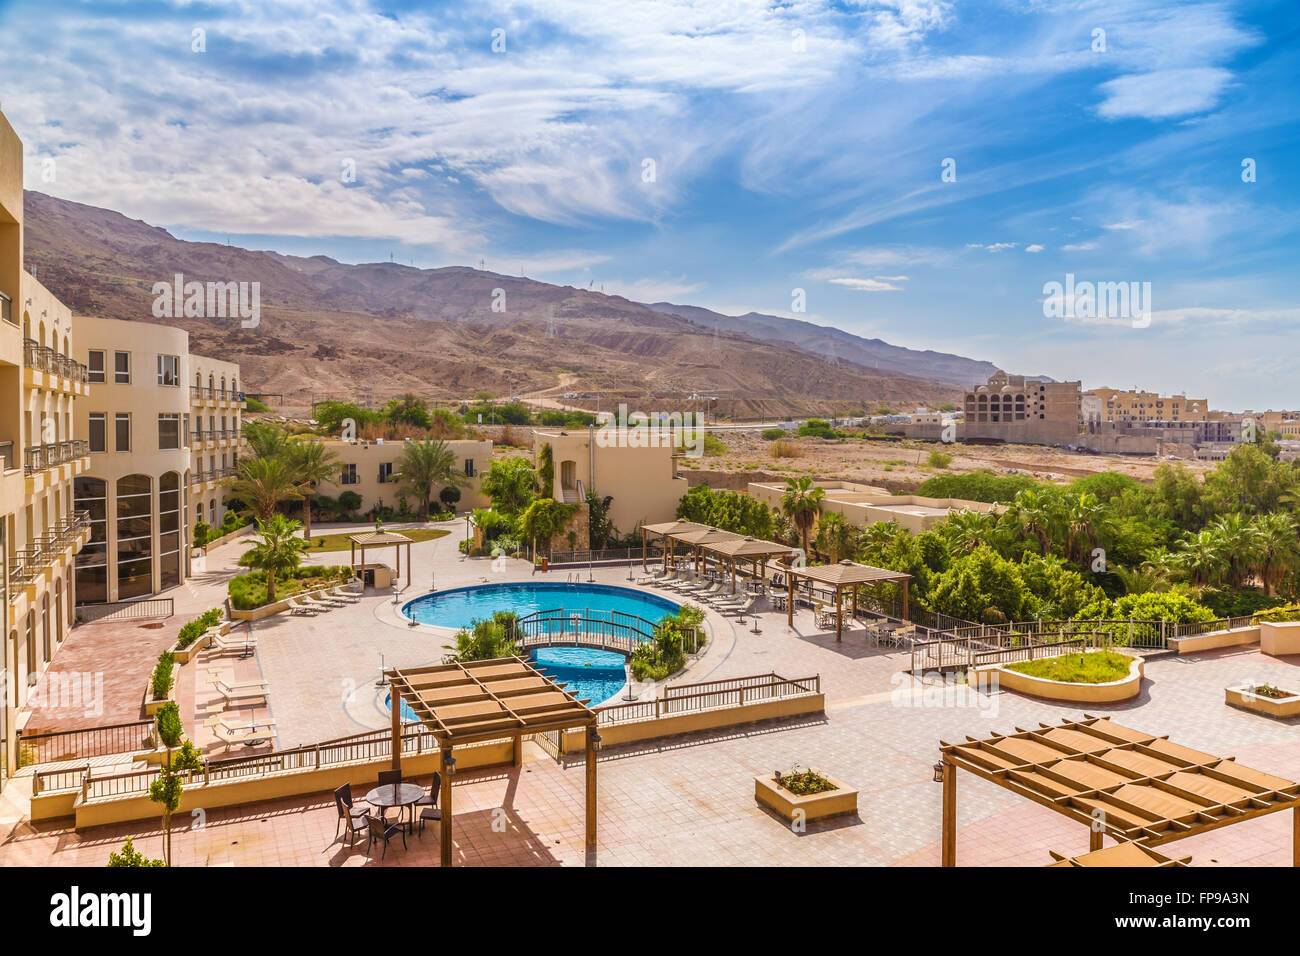 Hotel swimming pool with views of the desert rocks Stock Photo